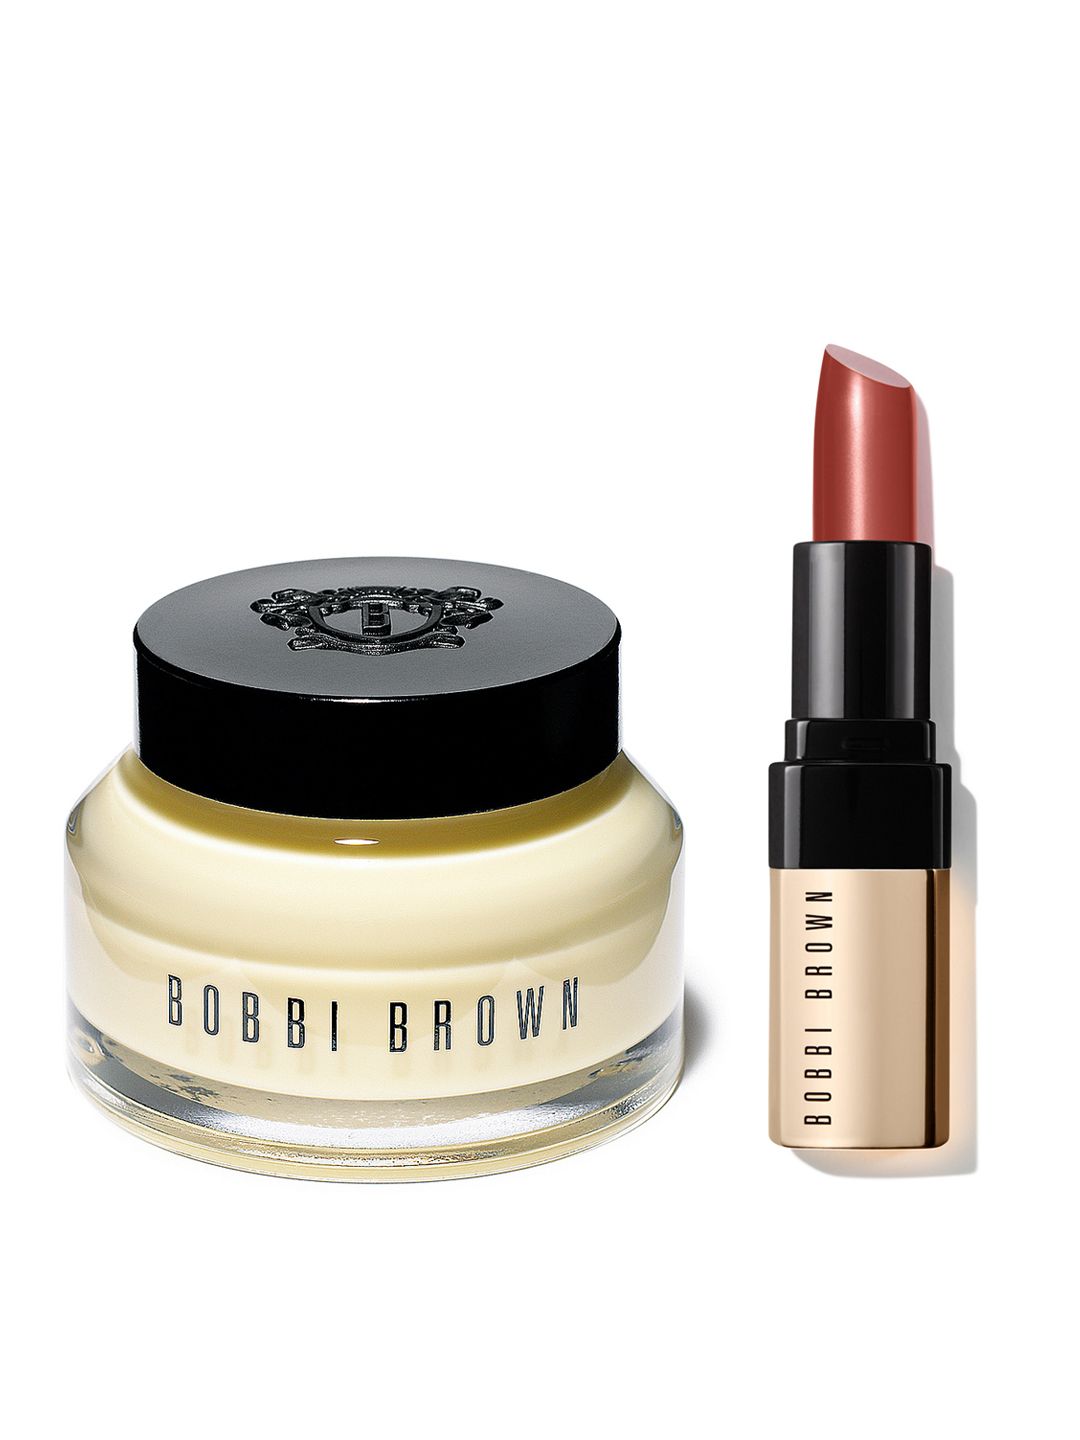 Bobbi Brown Set of Vitamin Enriched Skin Face Base & Luxe Lip Color - Claret Price in India